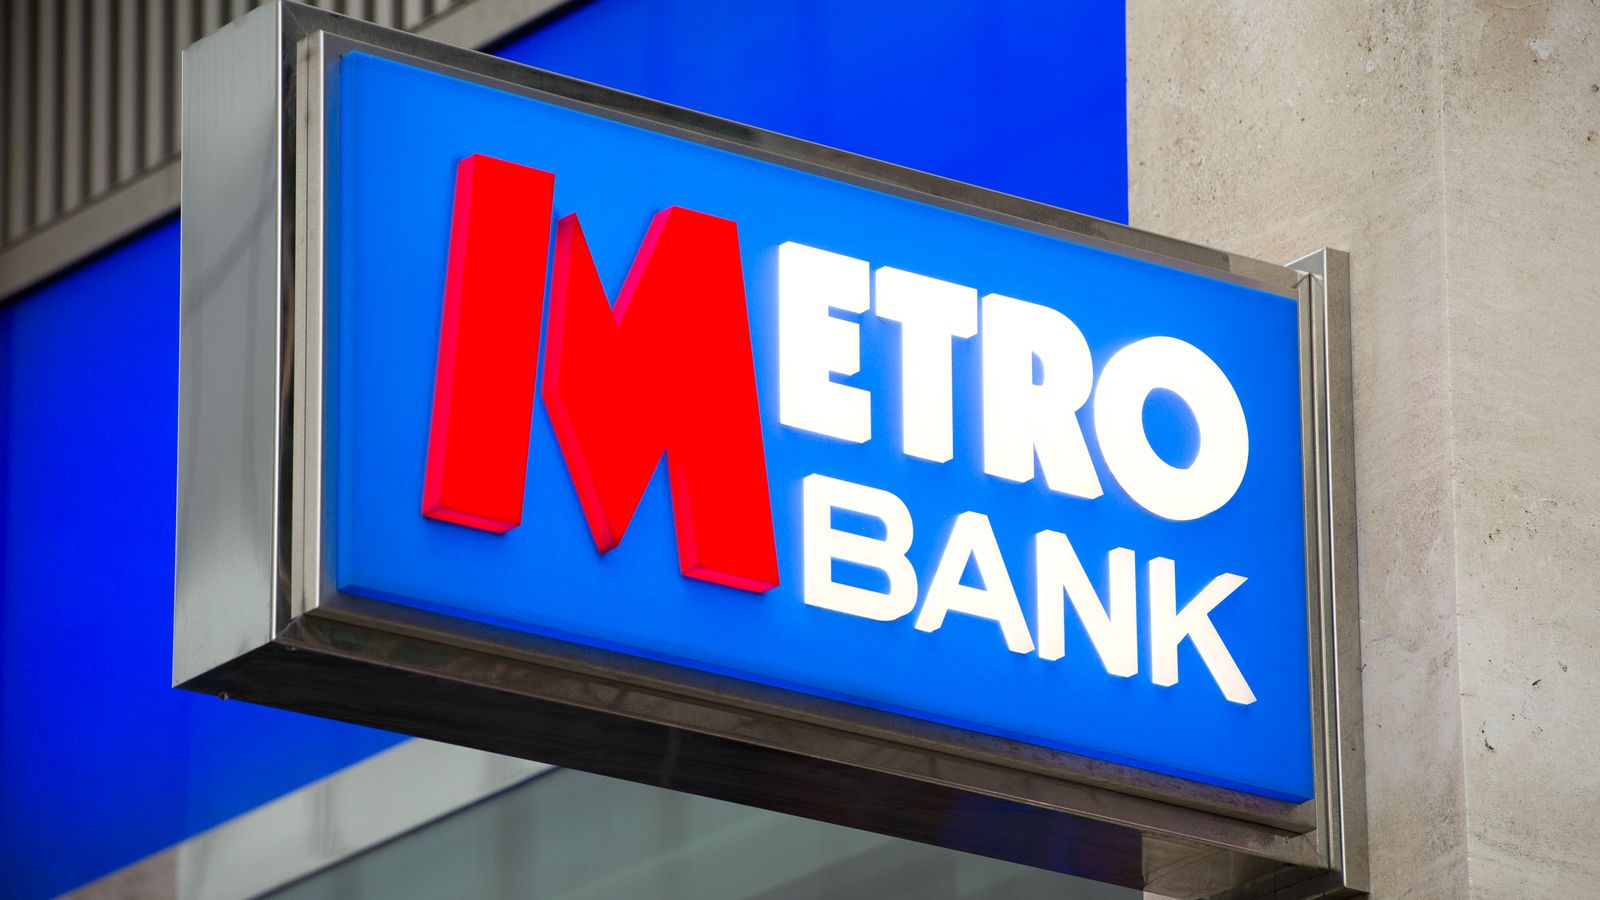 London hedge fund Caius Capital was key player in Metro Bank rescue